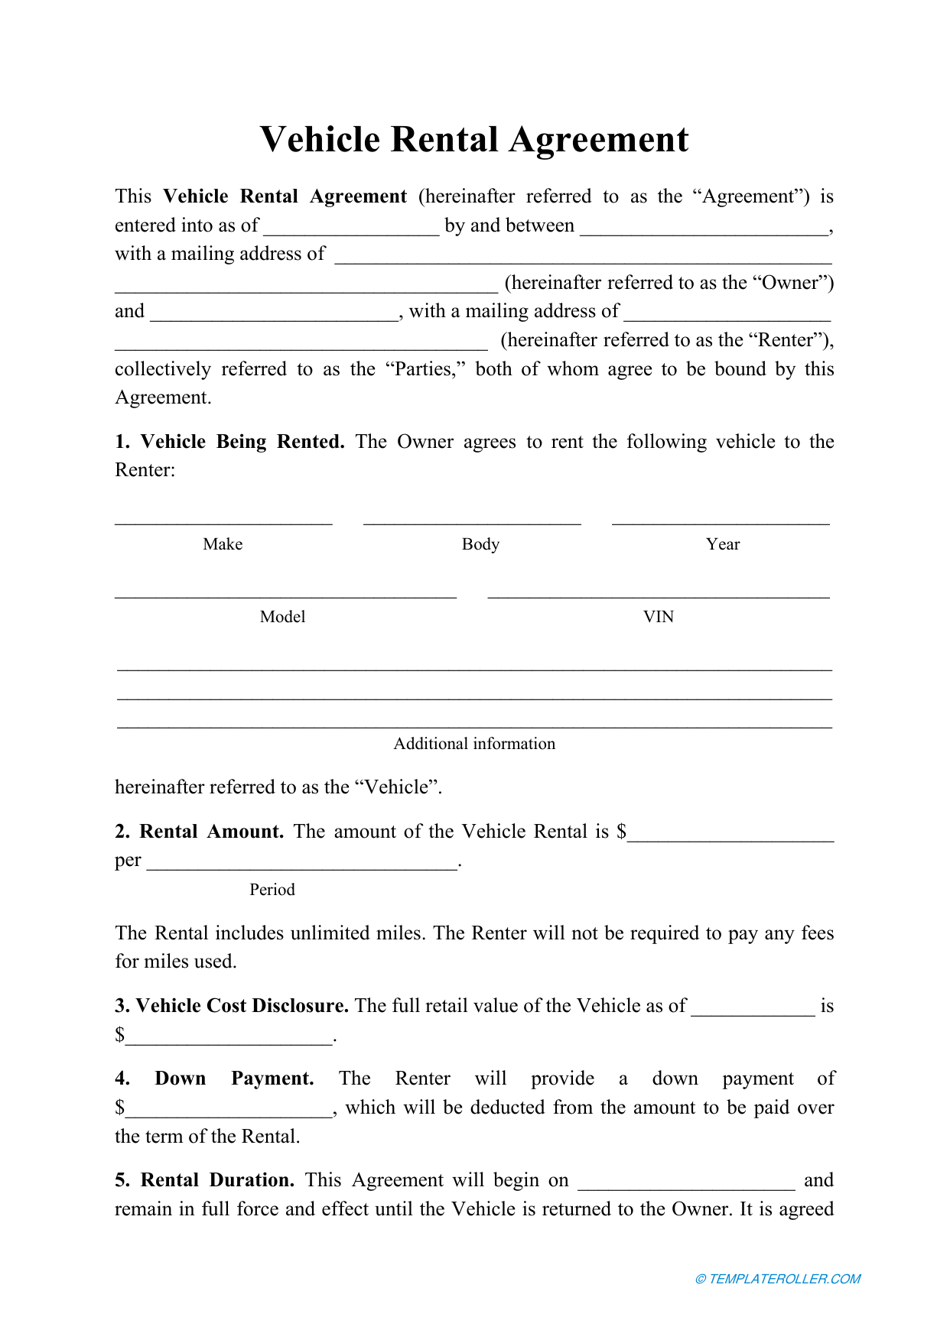 Vehicle Rental Agreement Template Download Printable PDF Inside private rental agreement template